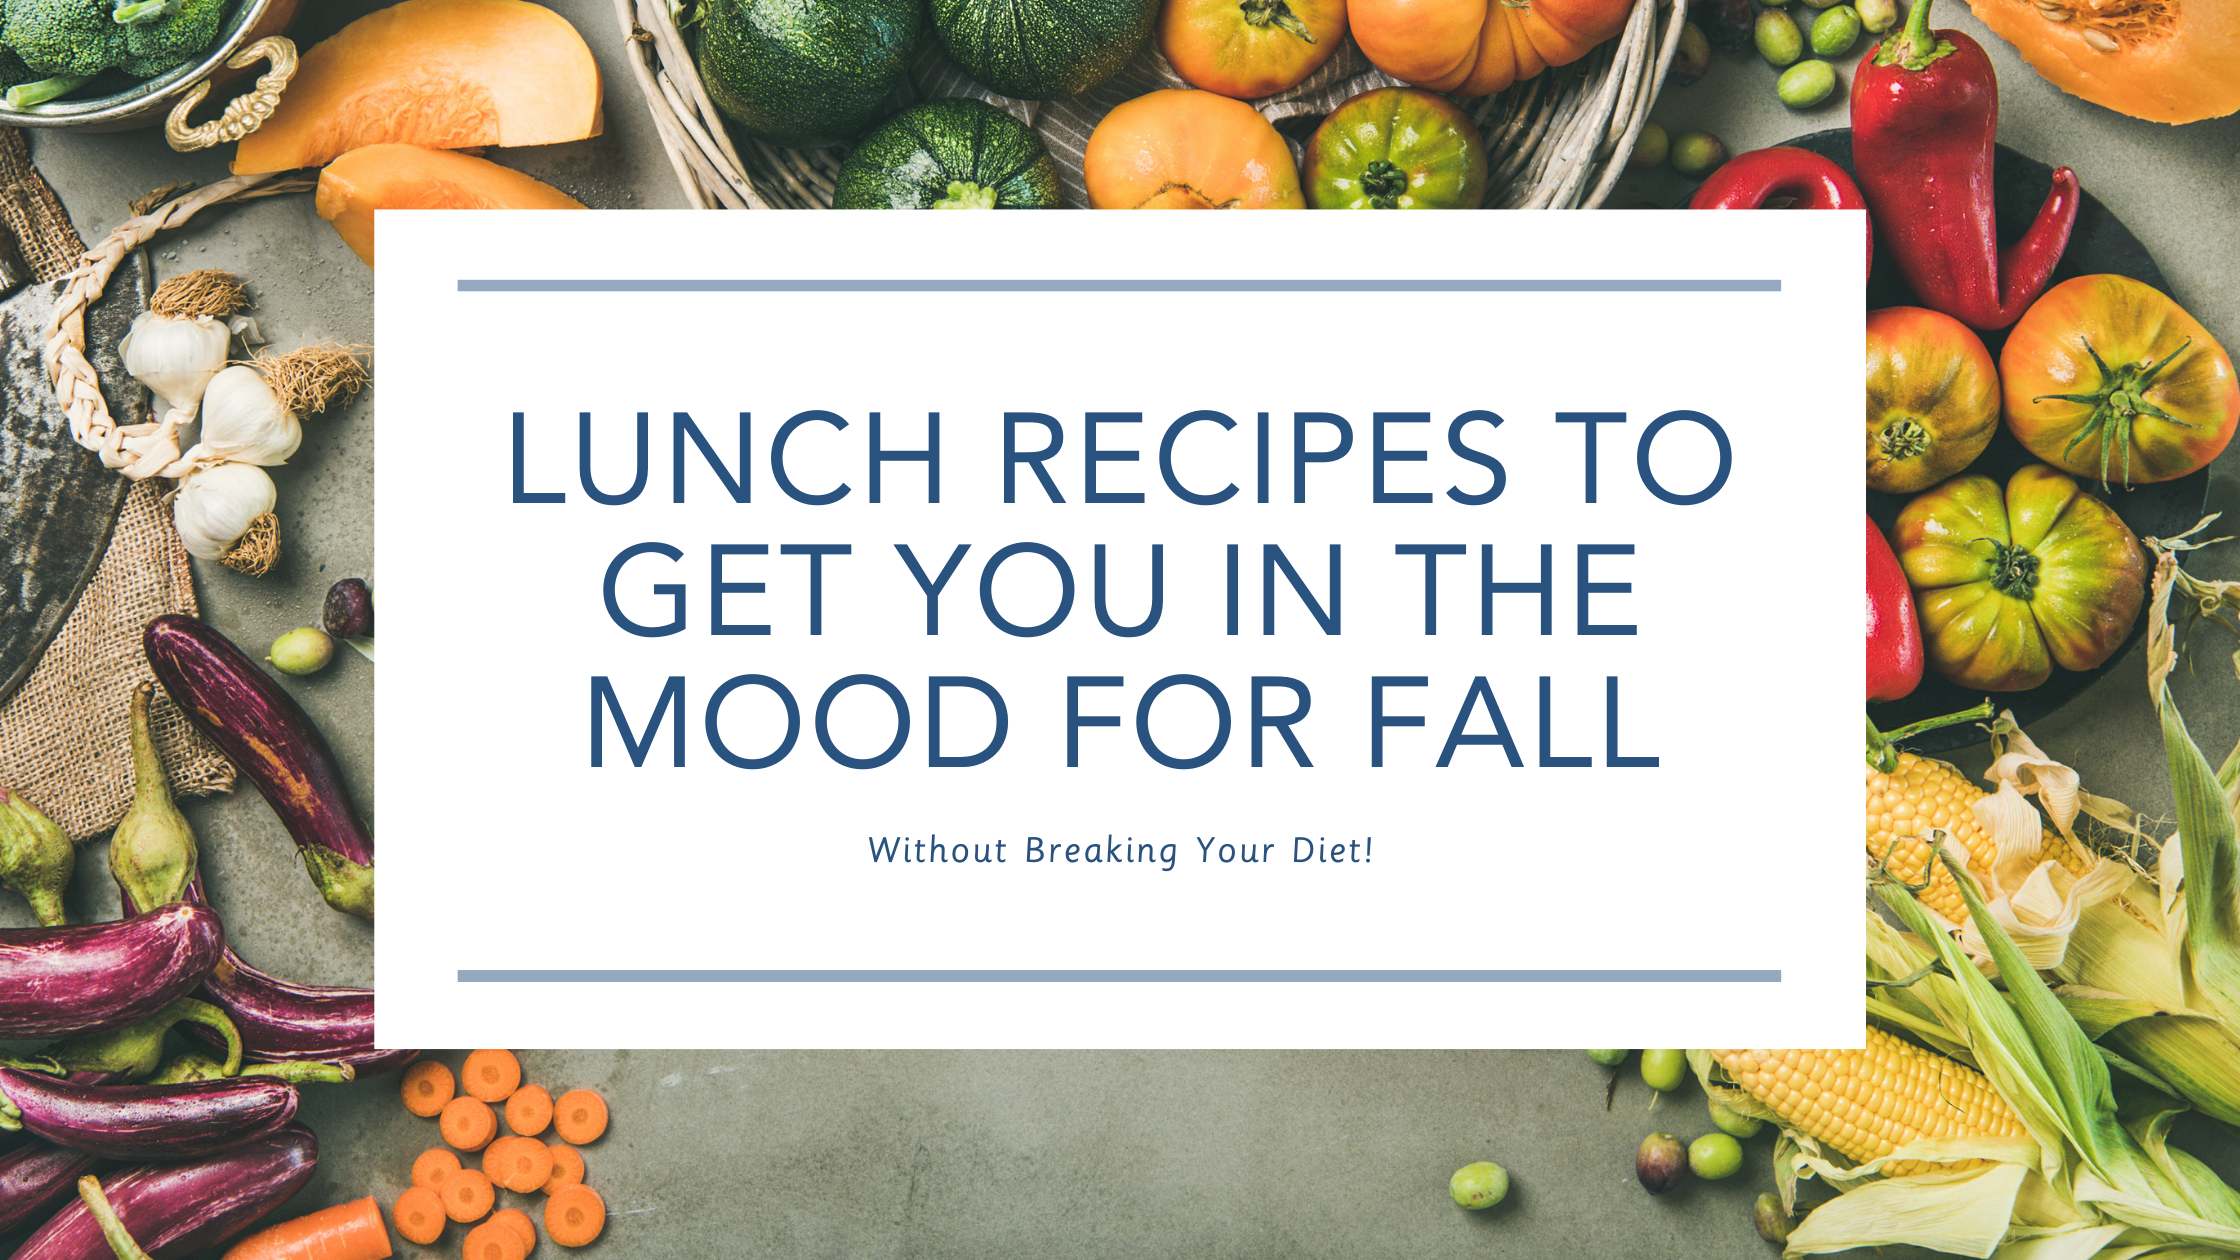 itrackbites fall lunch recipes